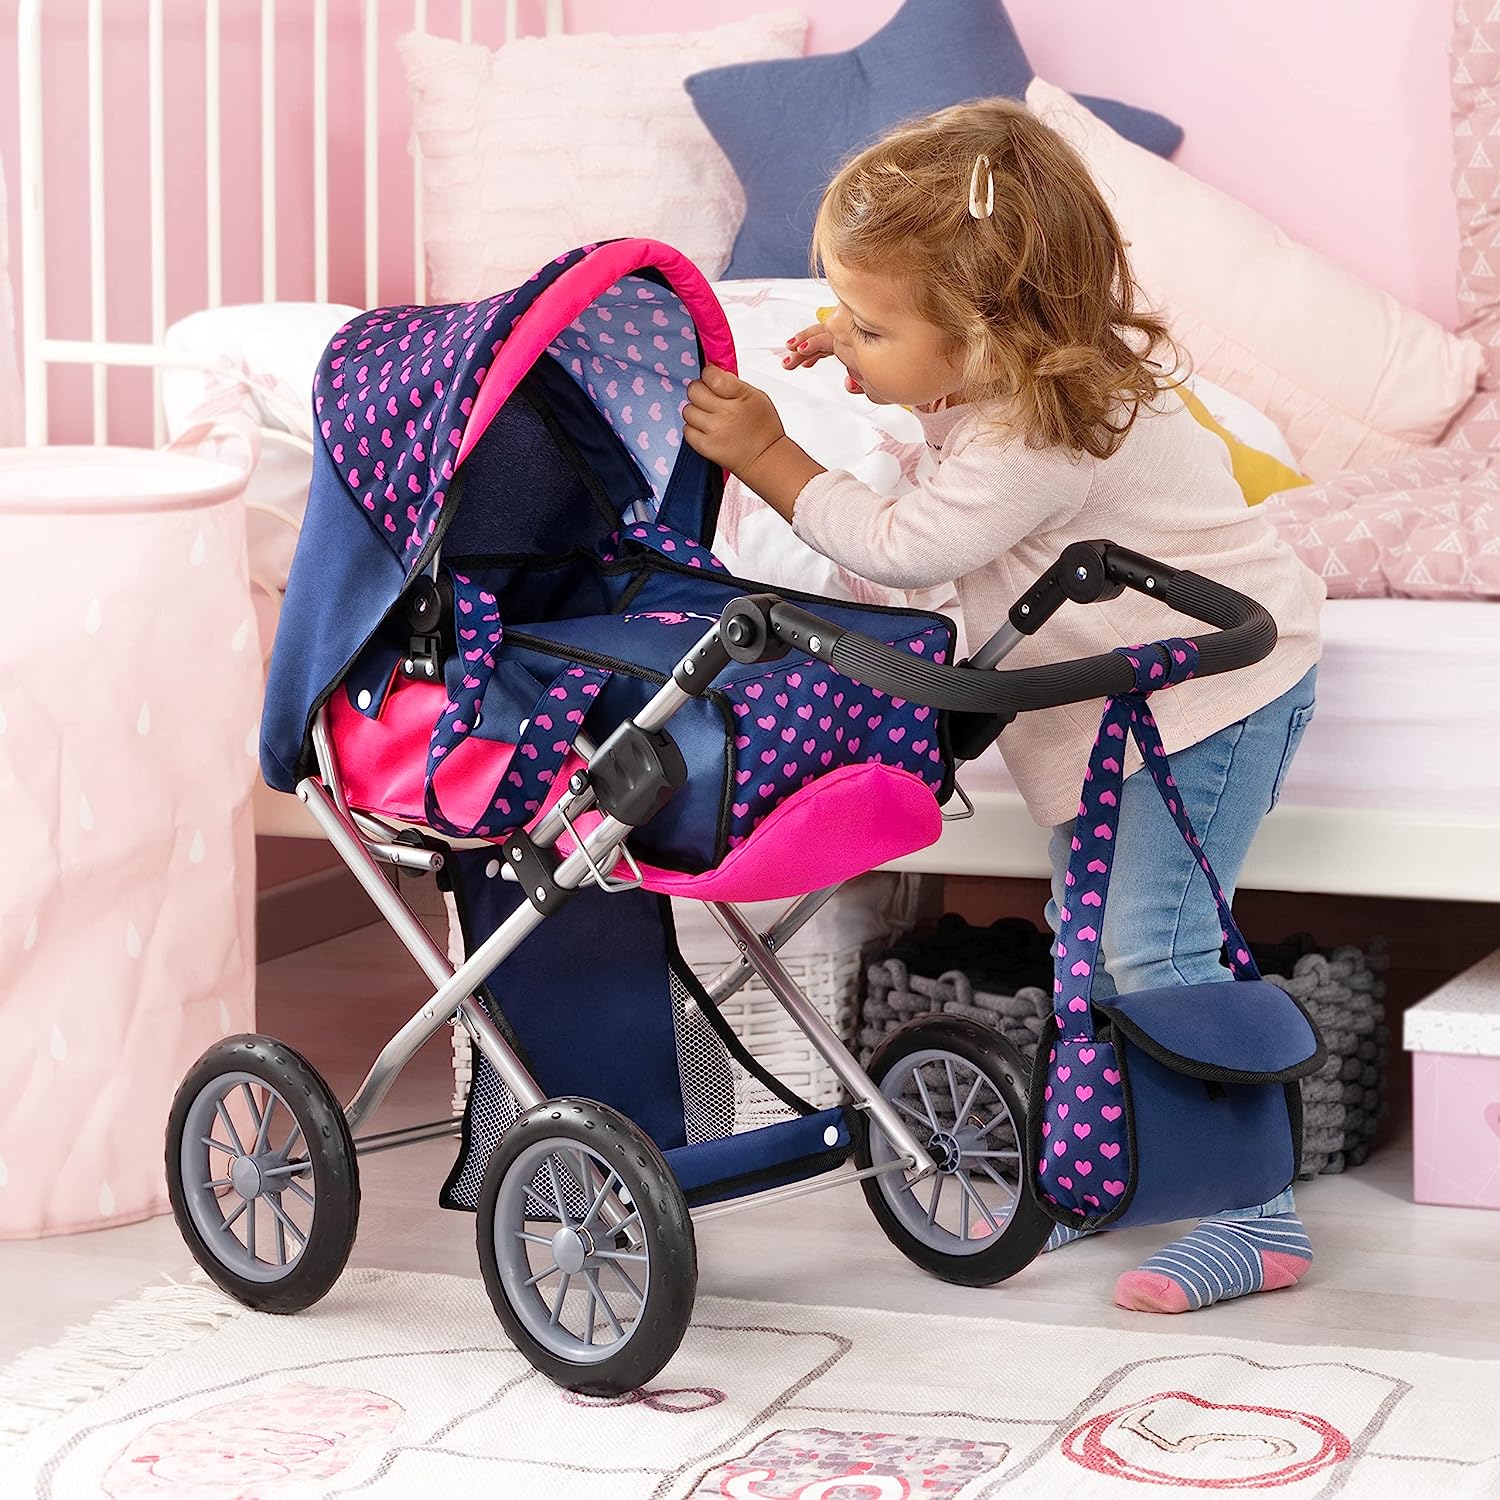 Baby Doll City Star Pram in Polka Dots, Blue and Pink - SILBERSHELL